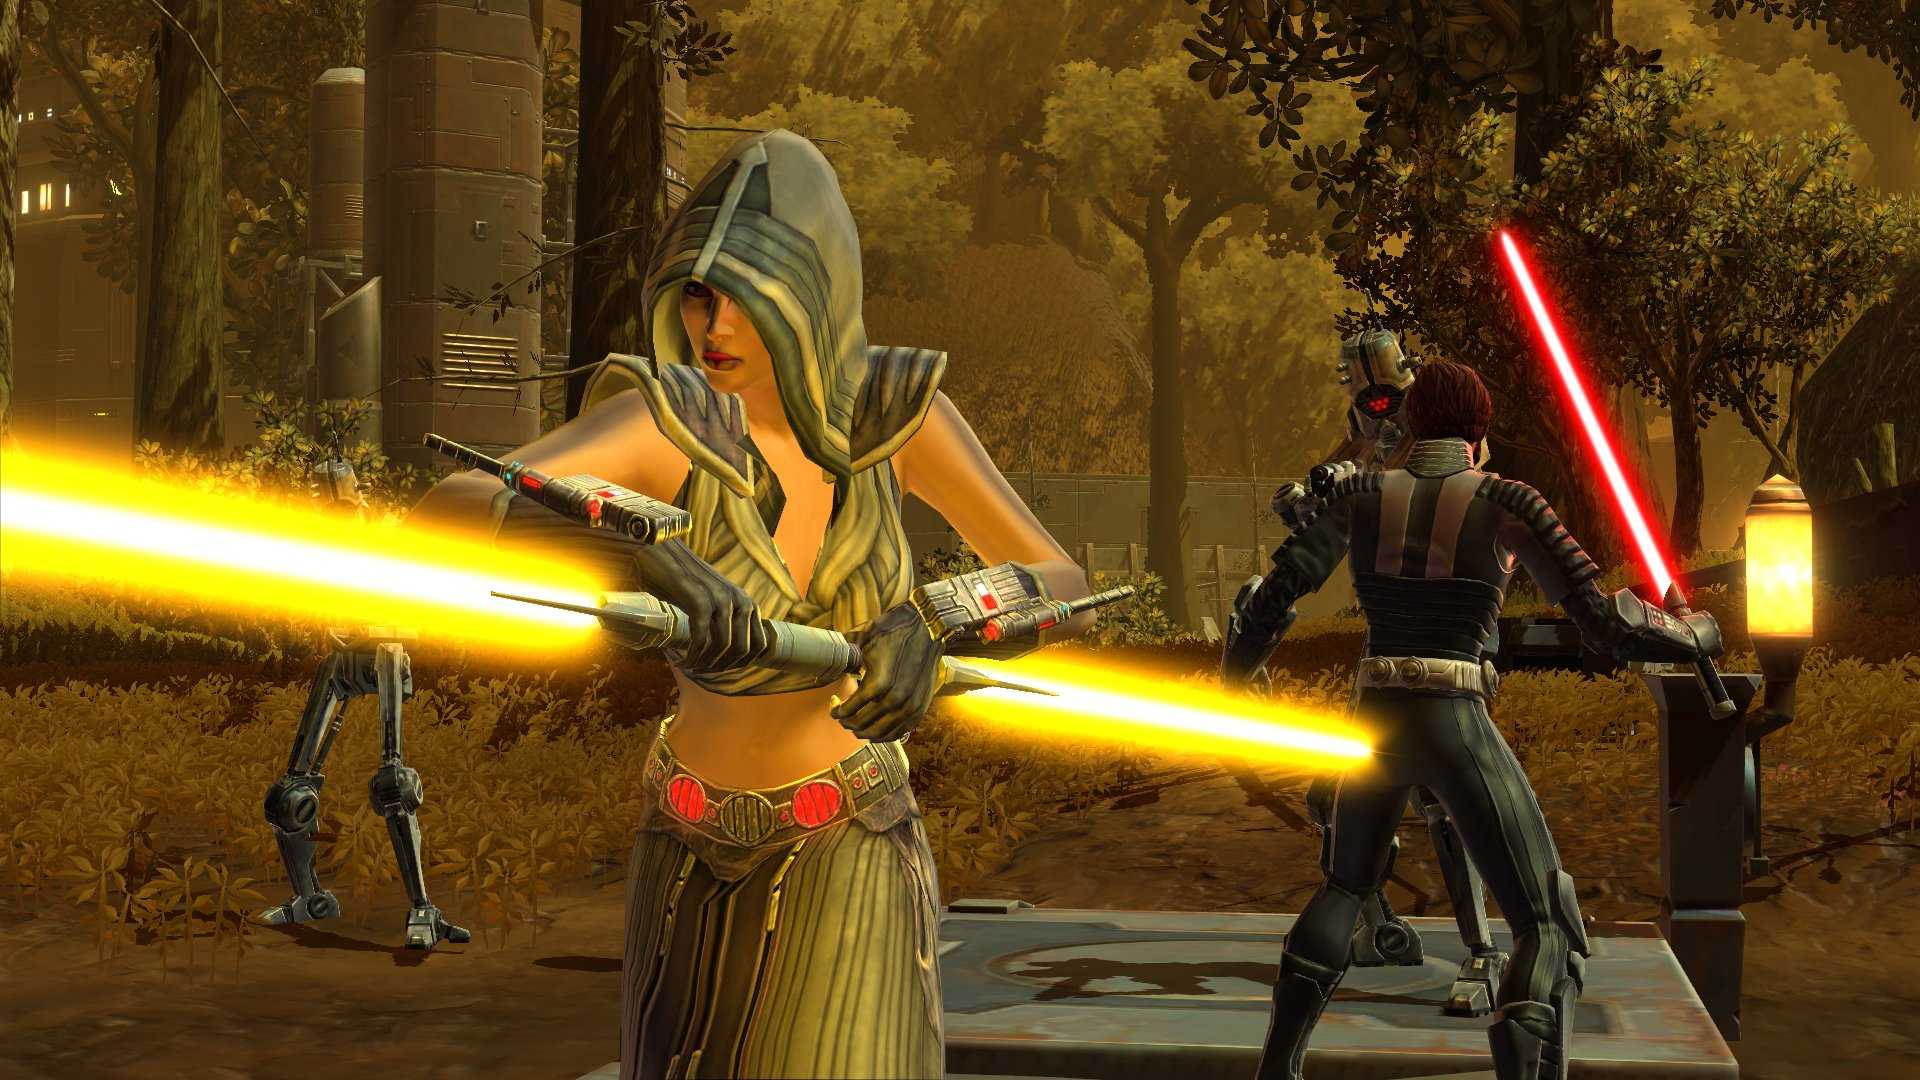 Star wars: knight of the old republic 2 the sith lords. достижения. – steam solo